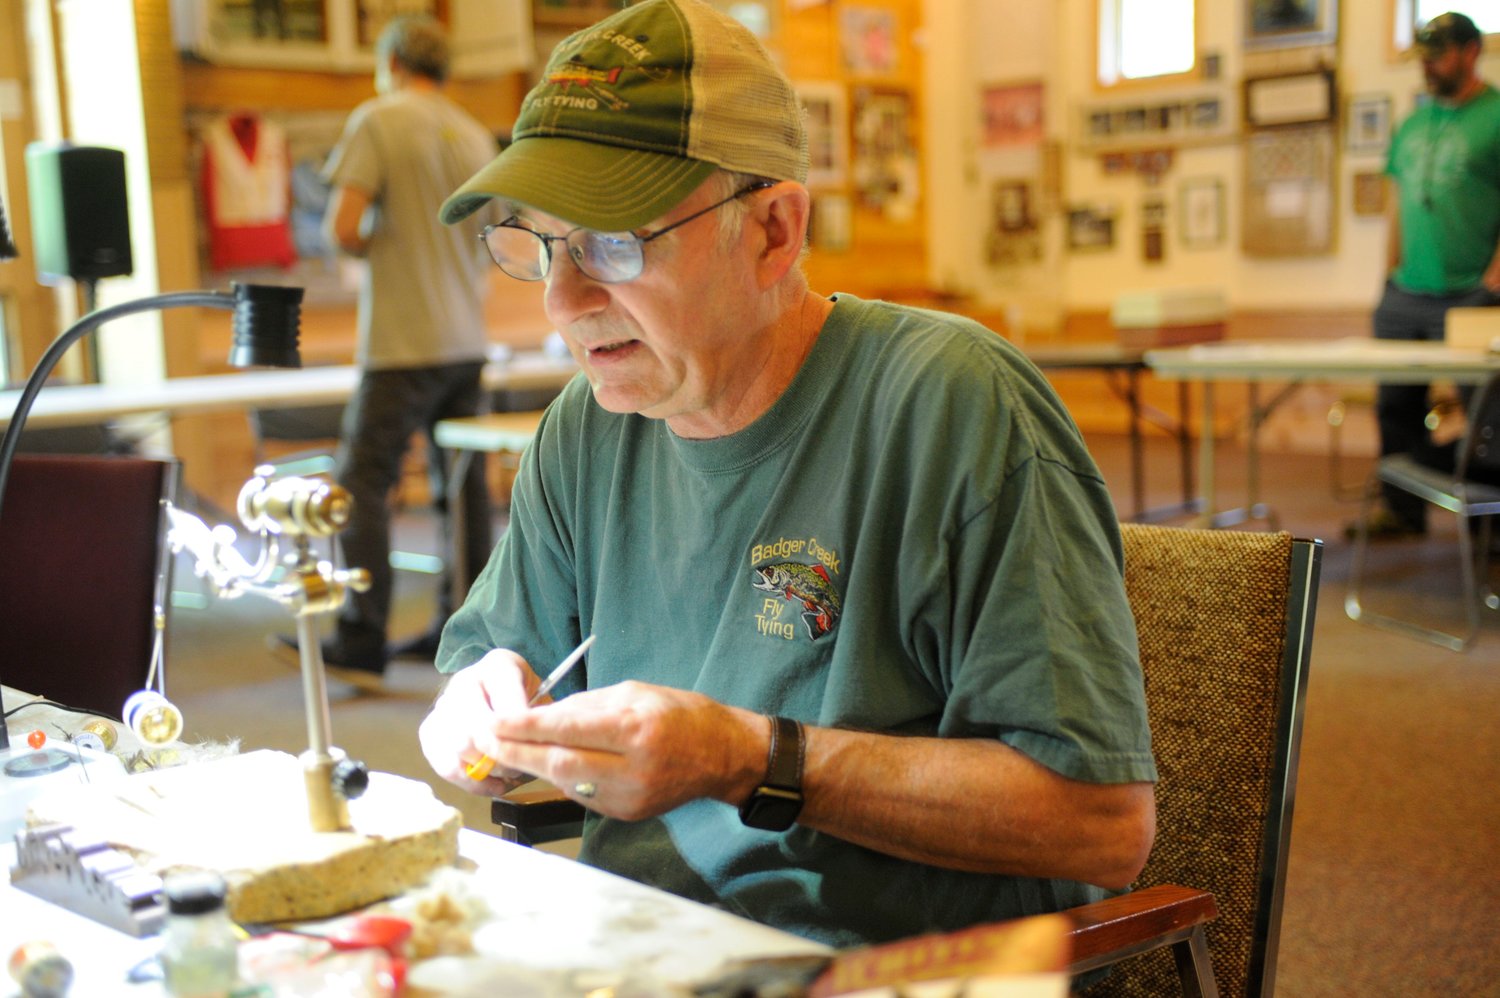 Focal point. Michael Hogue of Badger Creek Fly Tying in Freeville, NY, concentrates on creating a hand-tied fly...